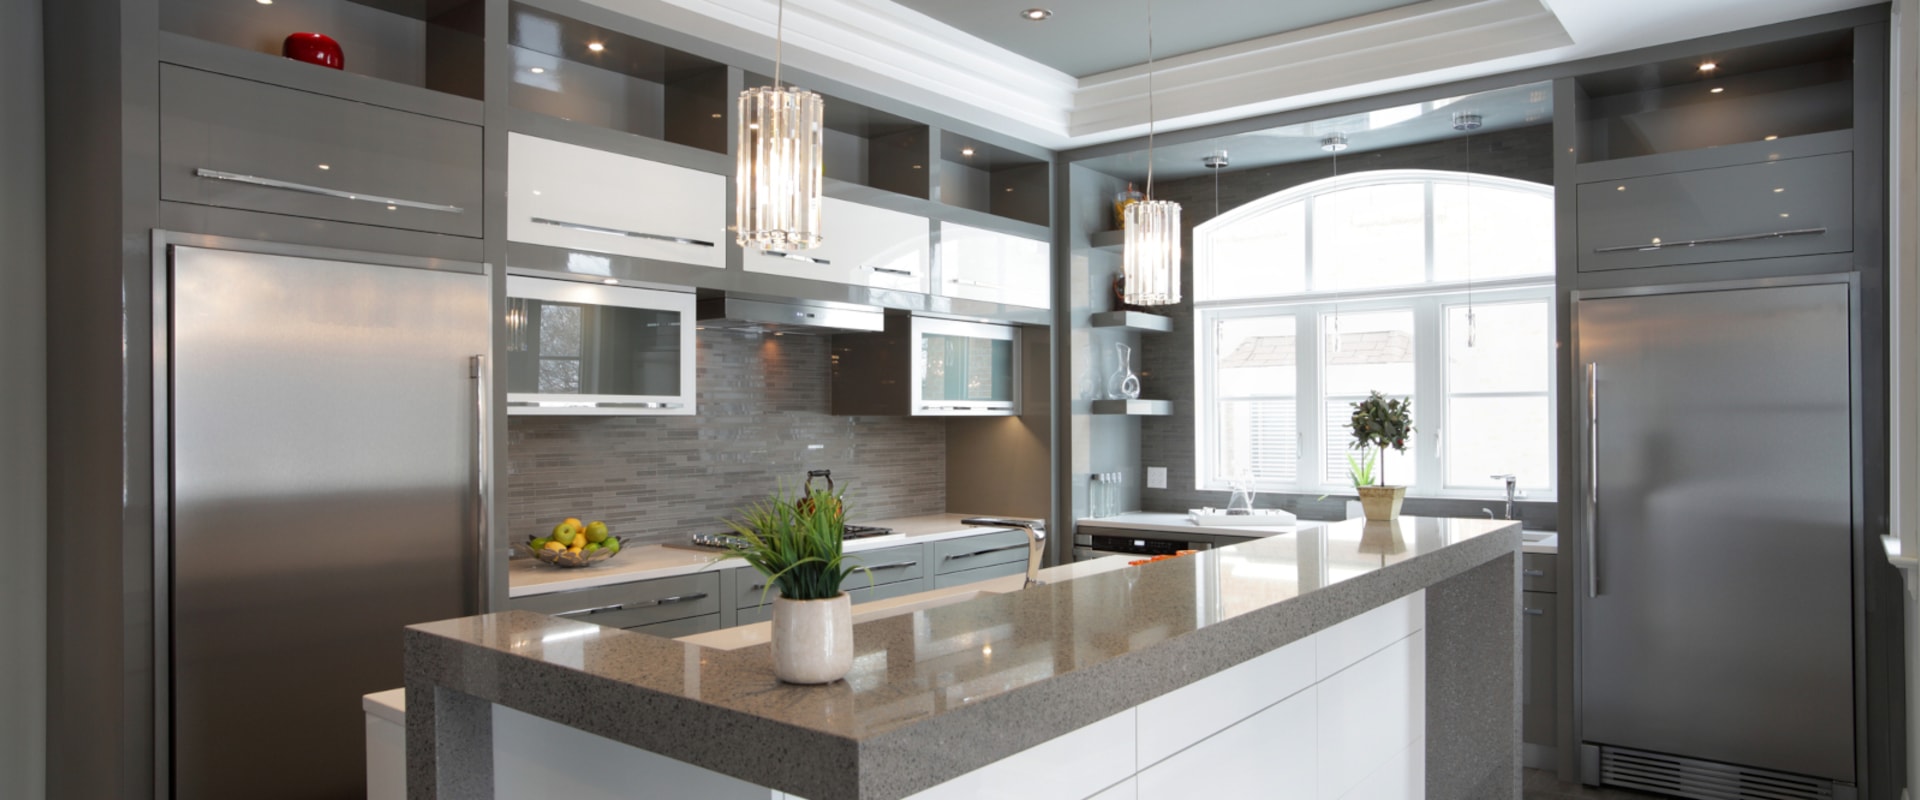 Choosing Materials and Finishes for Your Kitchen Renovation